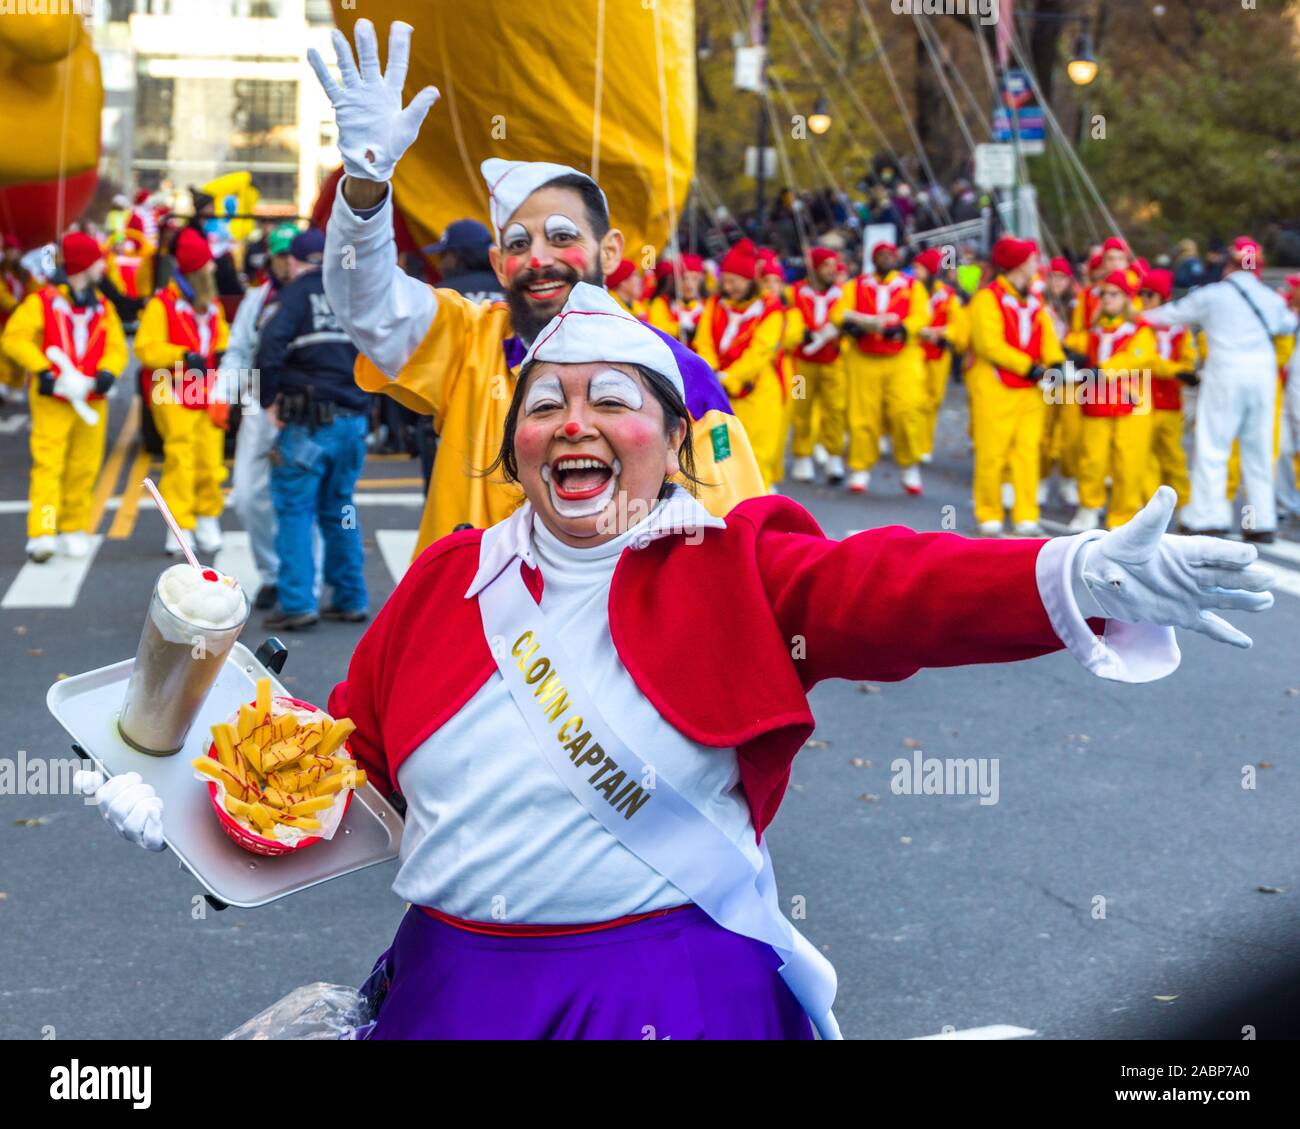 New York, USA,  28 November 2019.  Performers cheer the public at Macy's Thanksgiving Parade in New York City.   Credit: Enrique Shore/Alamy Live News Stock Photo